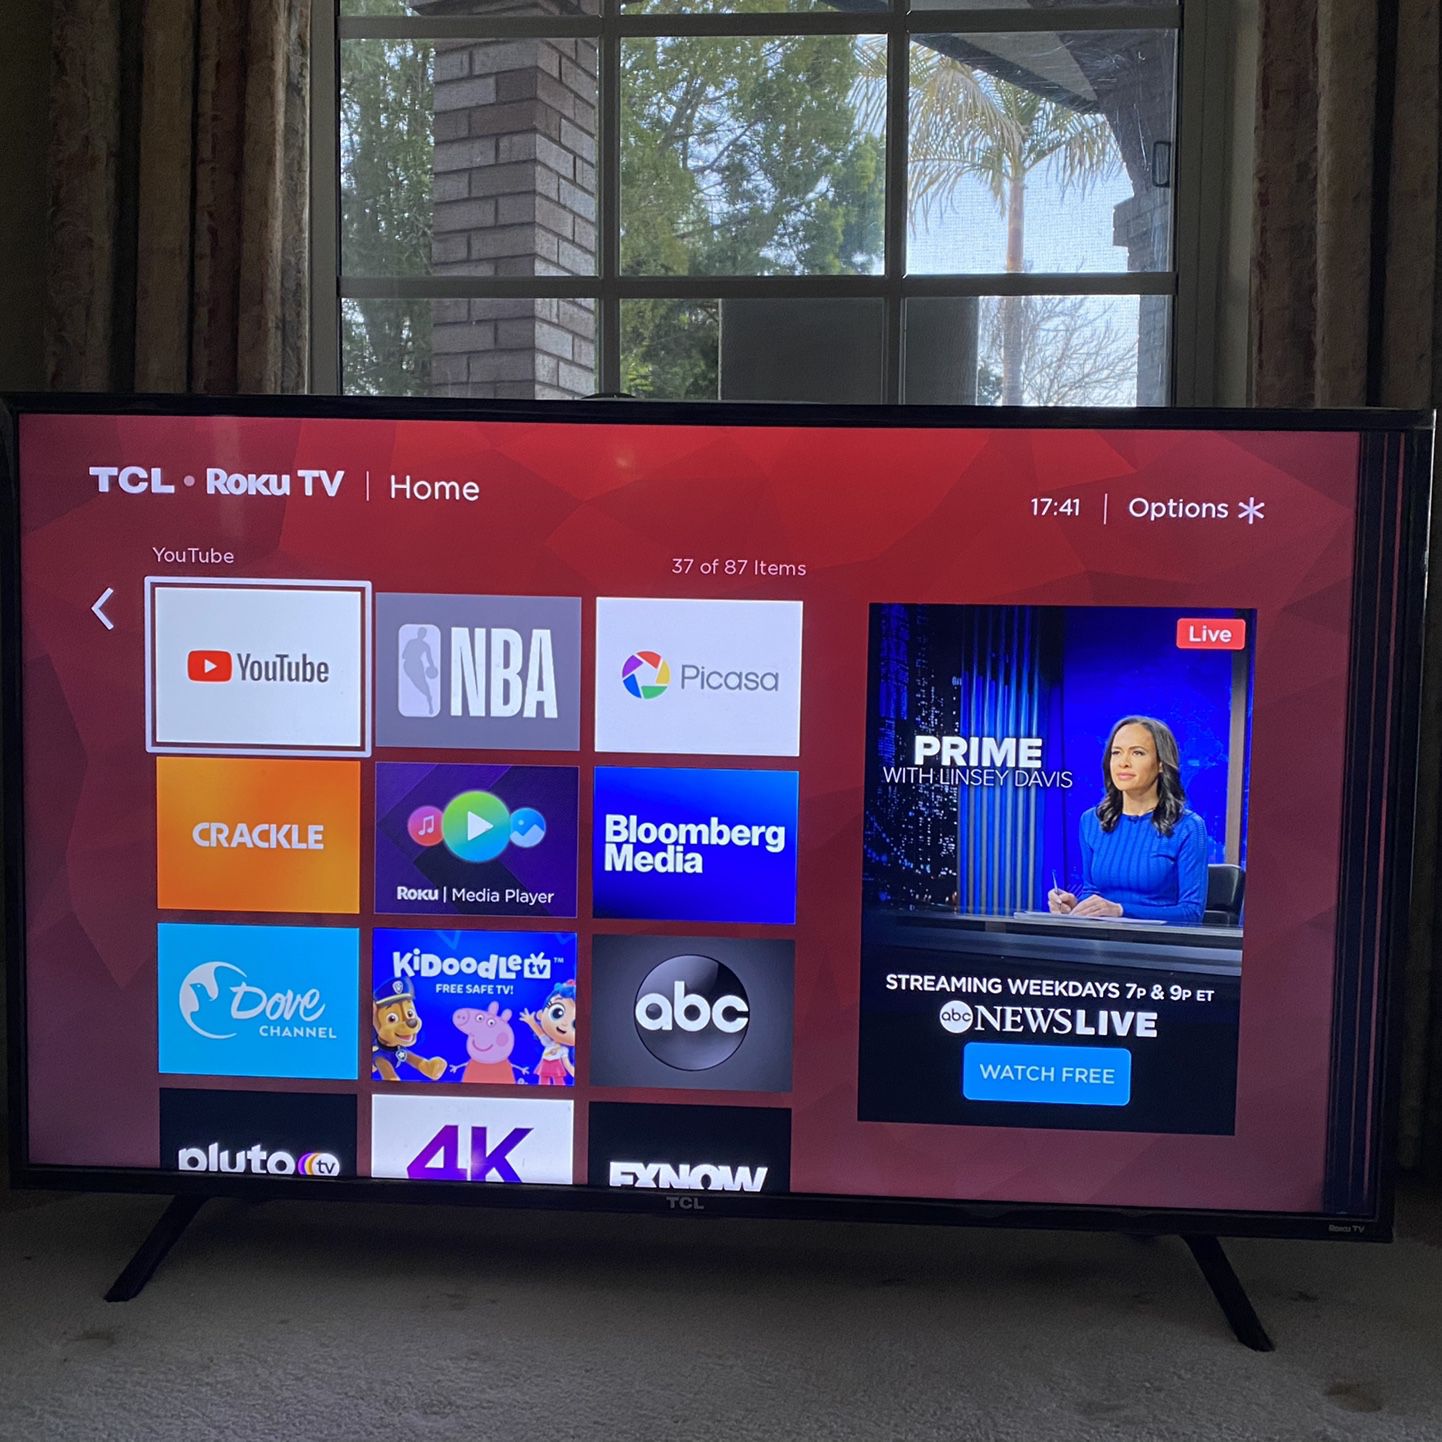 49 Inch TCL Smart TV